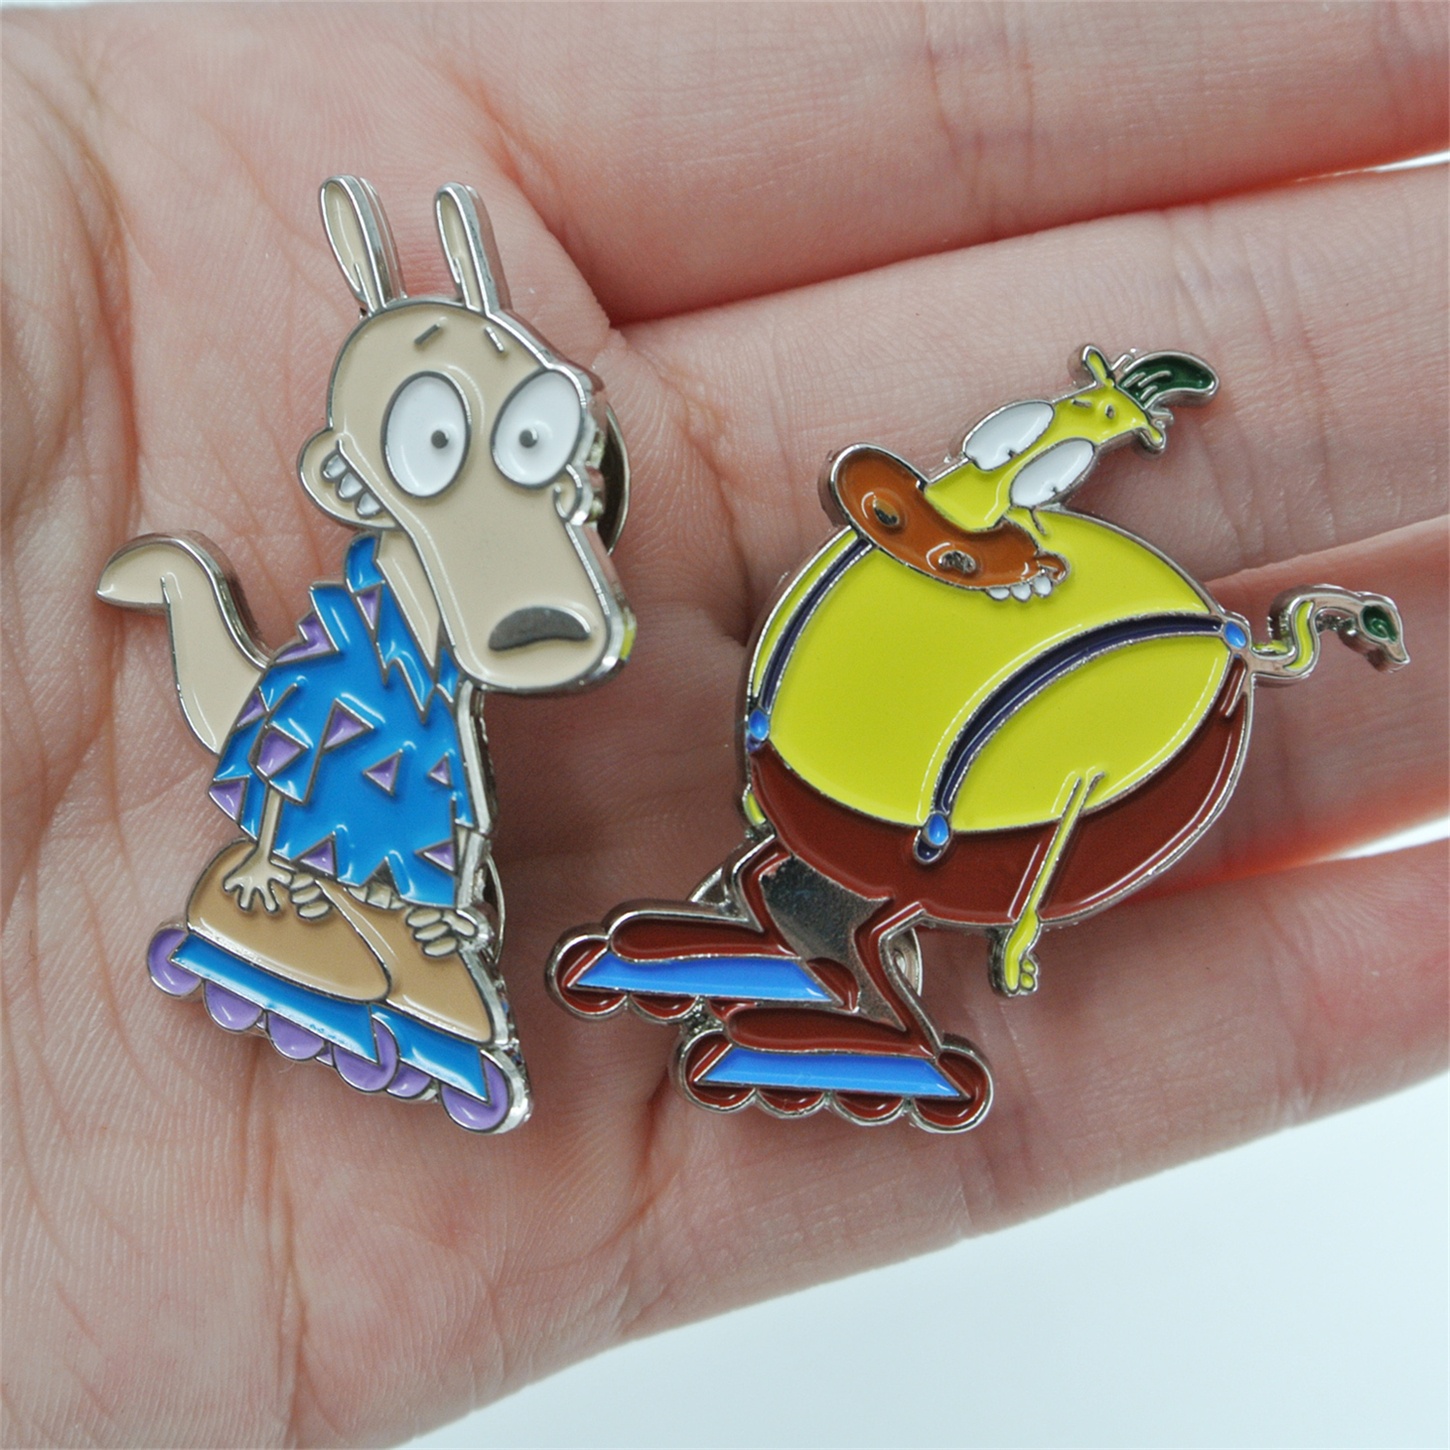 Custom Made Metal Hard Enamel Pins Sets With Backing card Packages